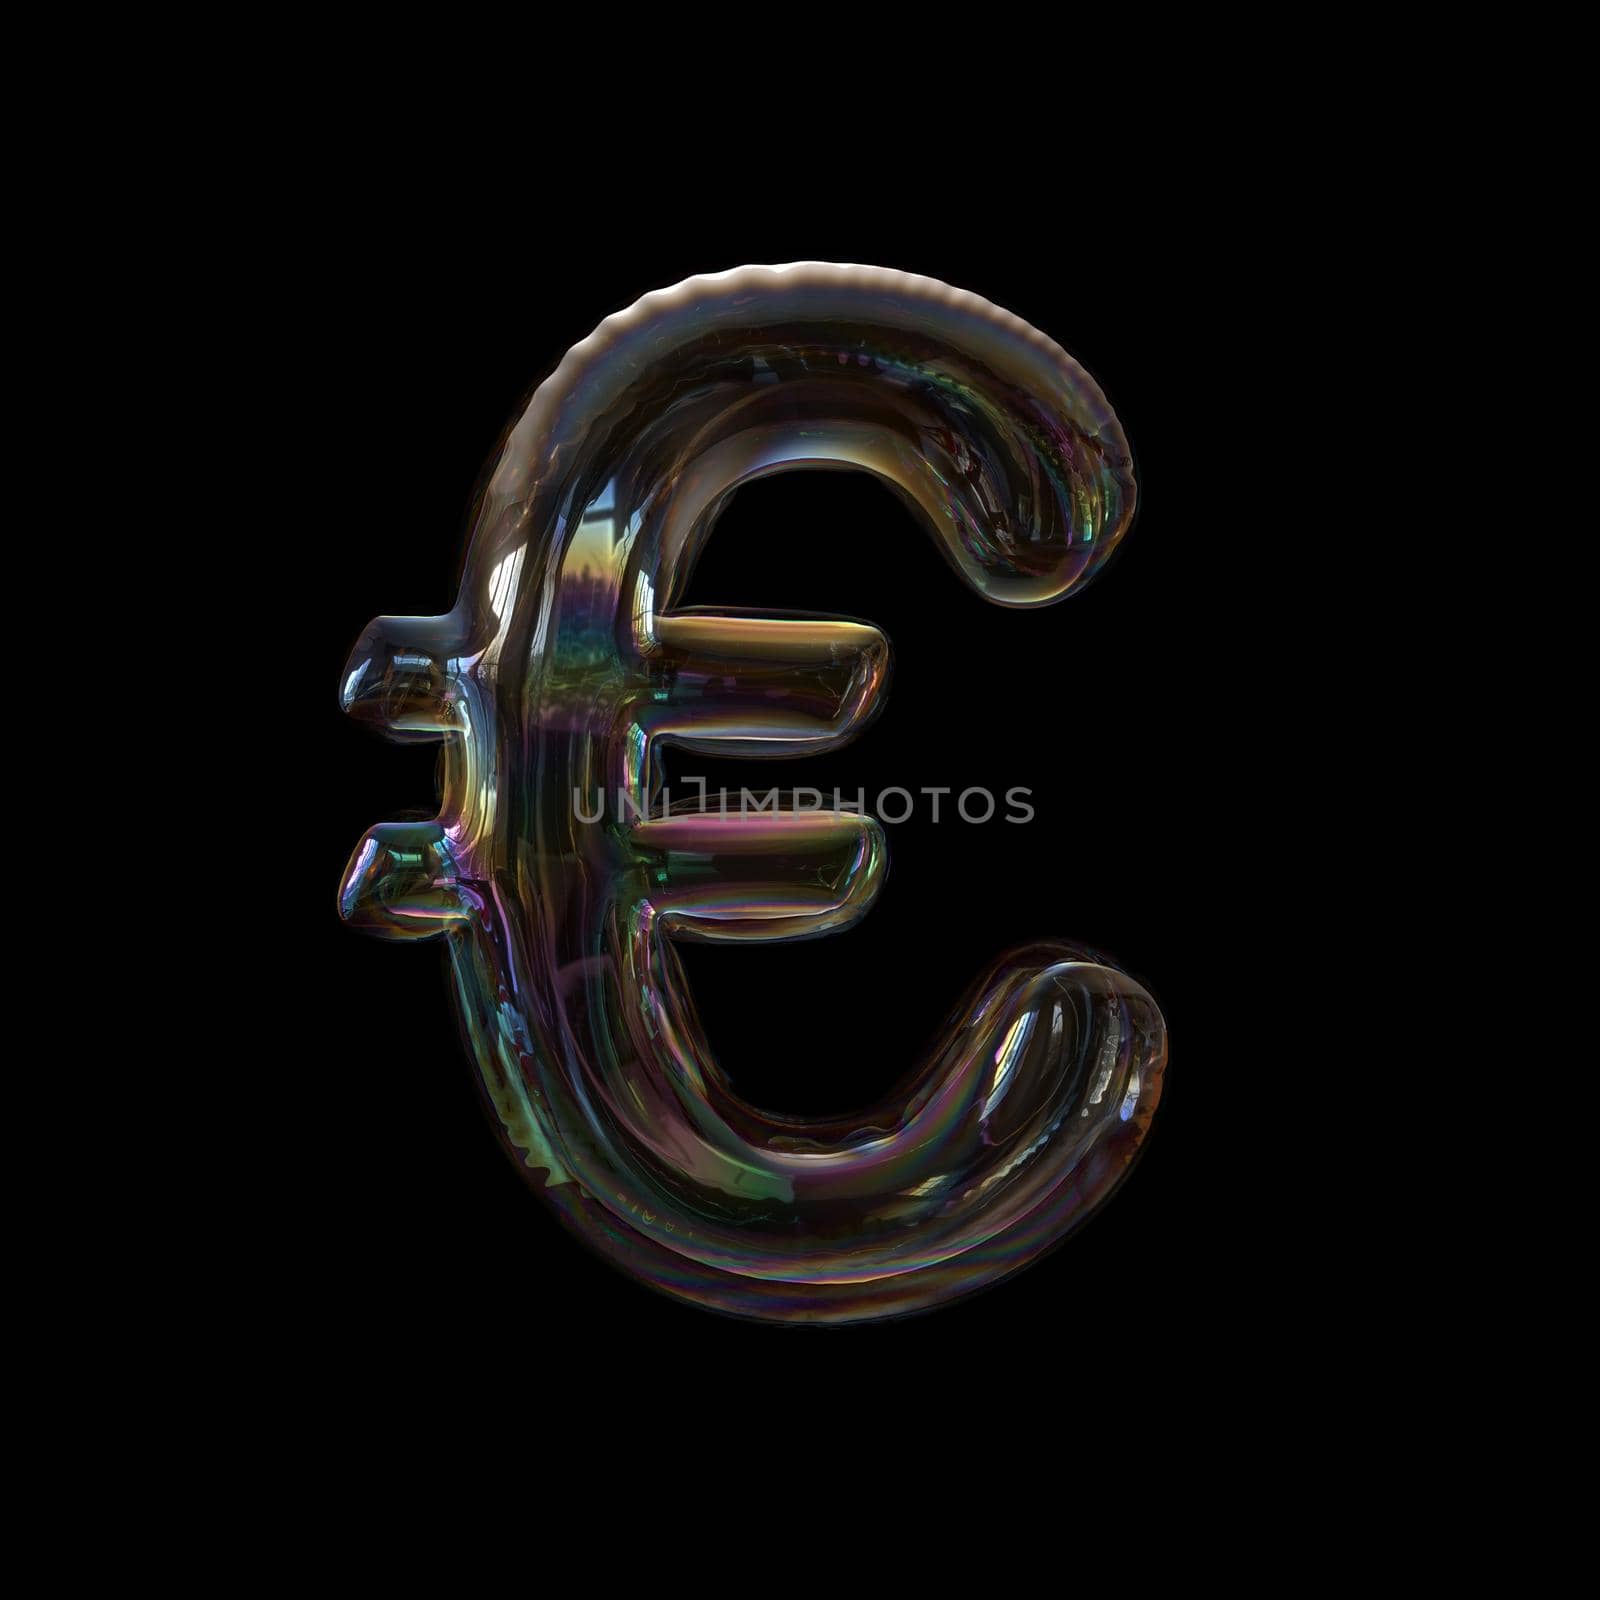 bubble euro currency sign isolated on a black background.
This 3d font collection is well-suited for various creative projects including but not limited to : Childhood. events. nature...